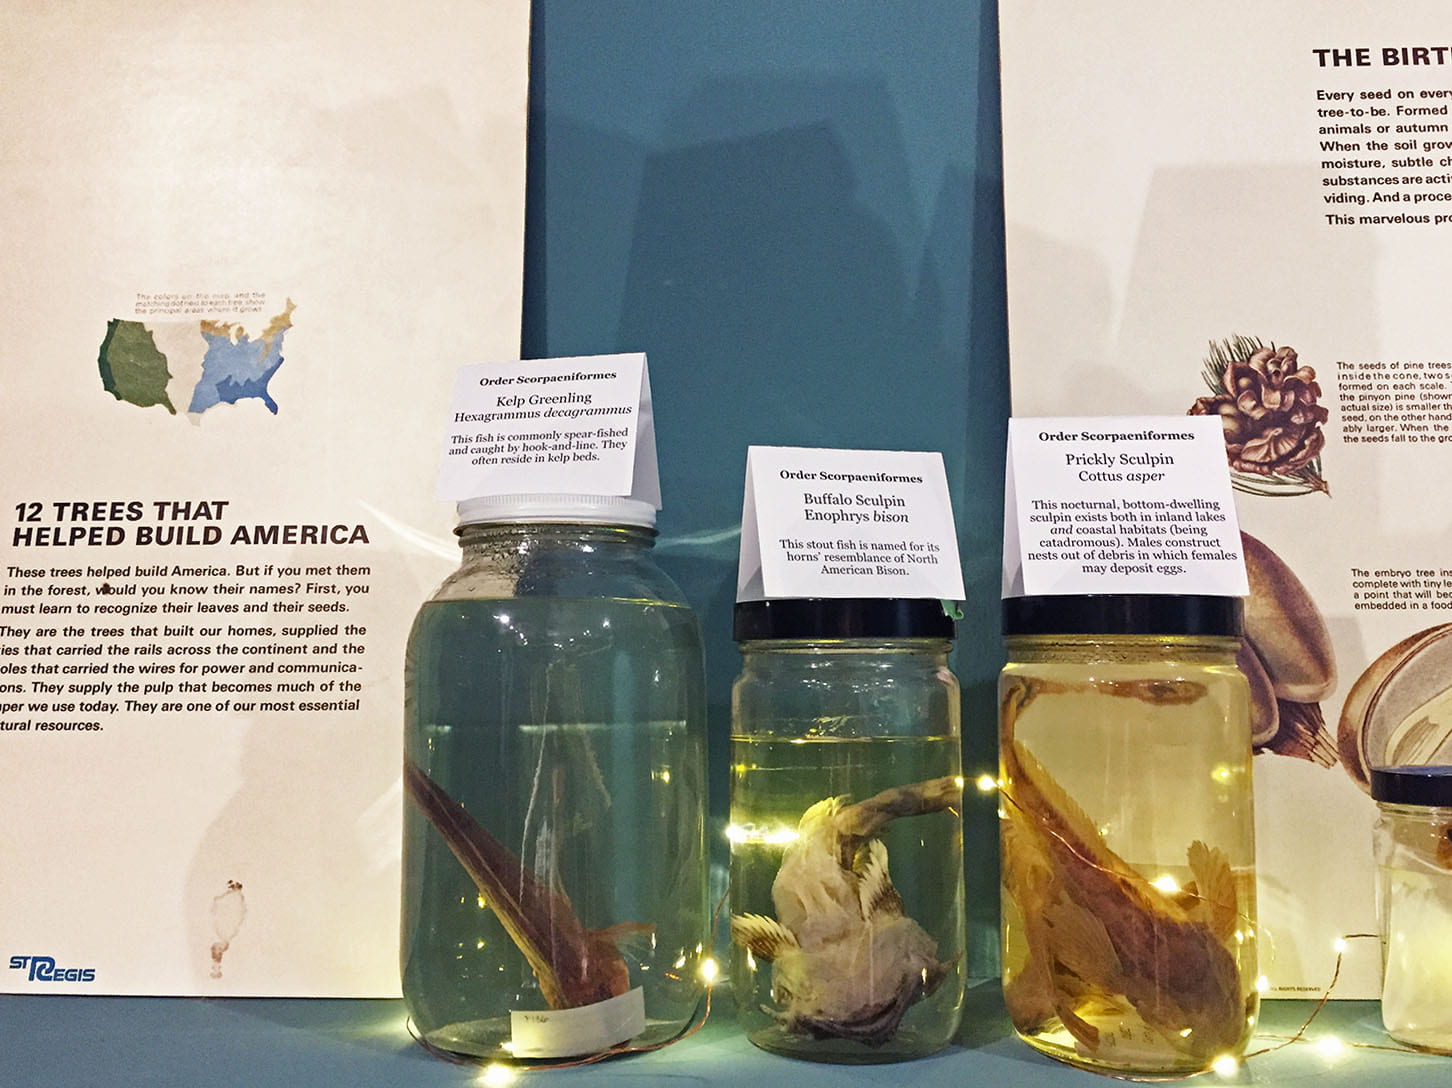 Jars containing specimens in water, labeled: Kelp Greenling, Buffalo Sculpin, Prickly Sculpin